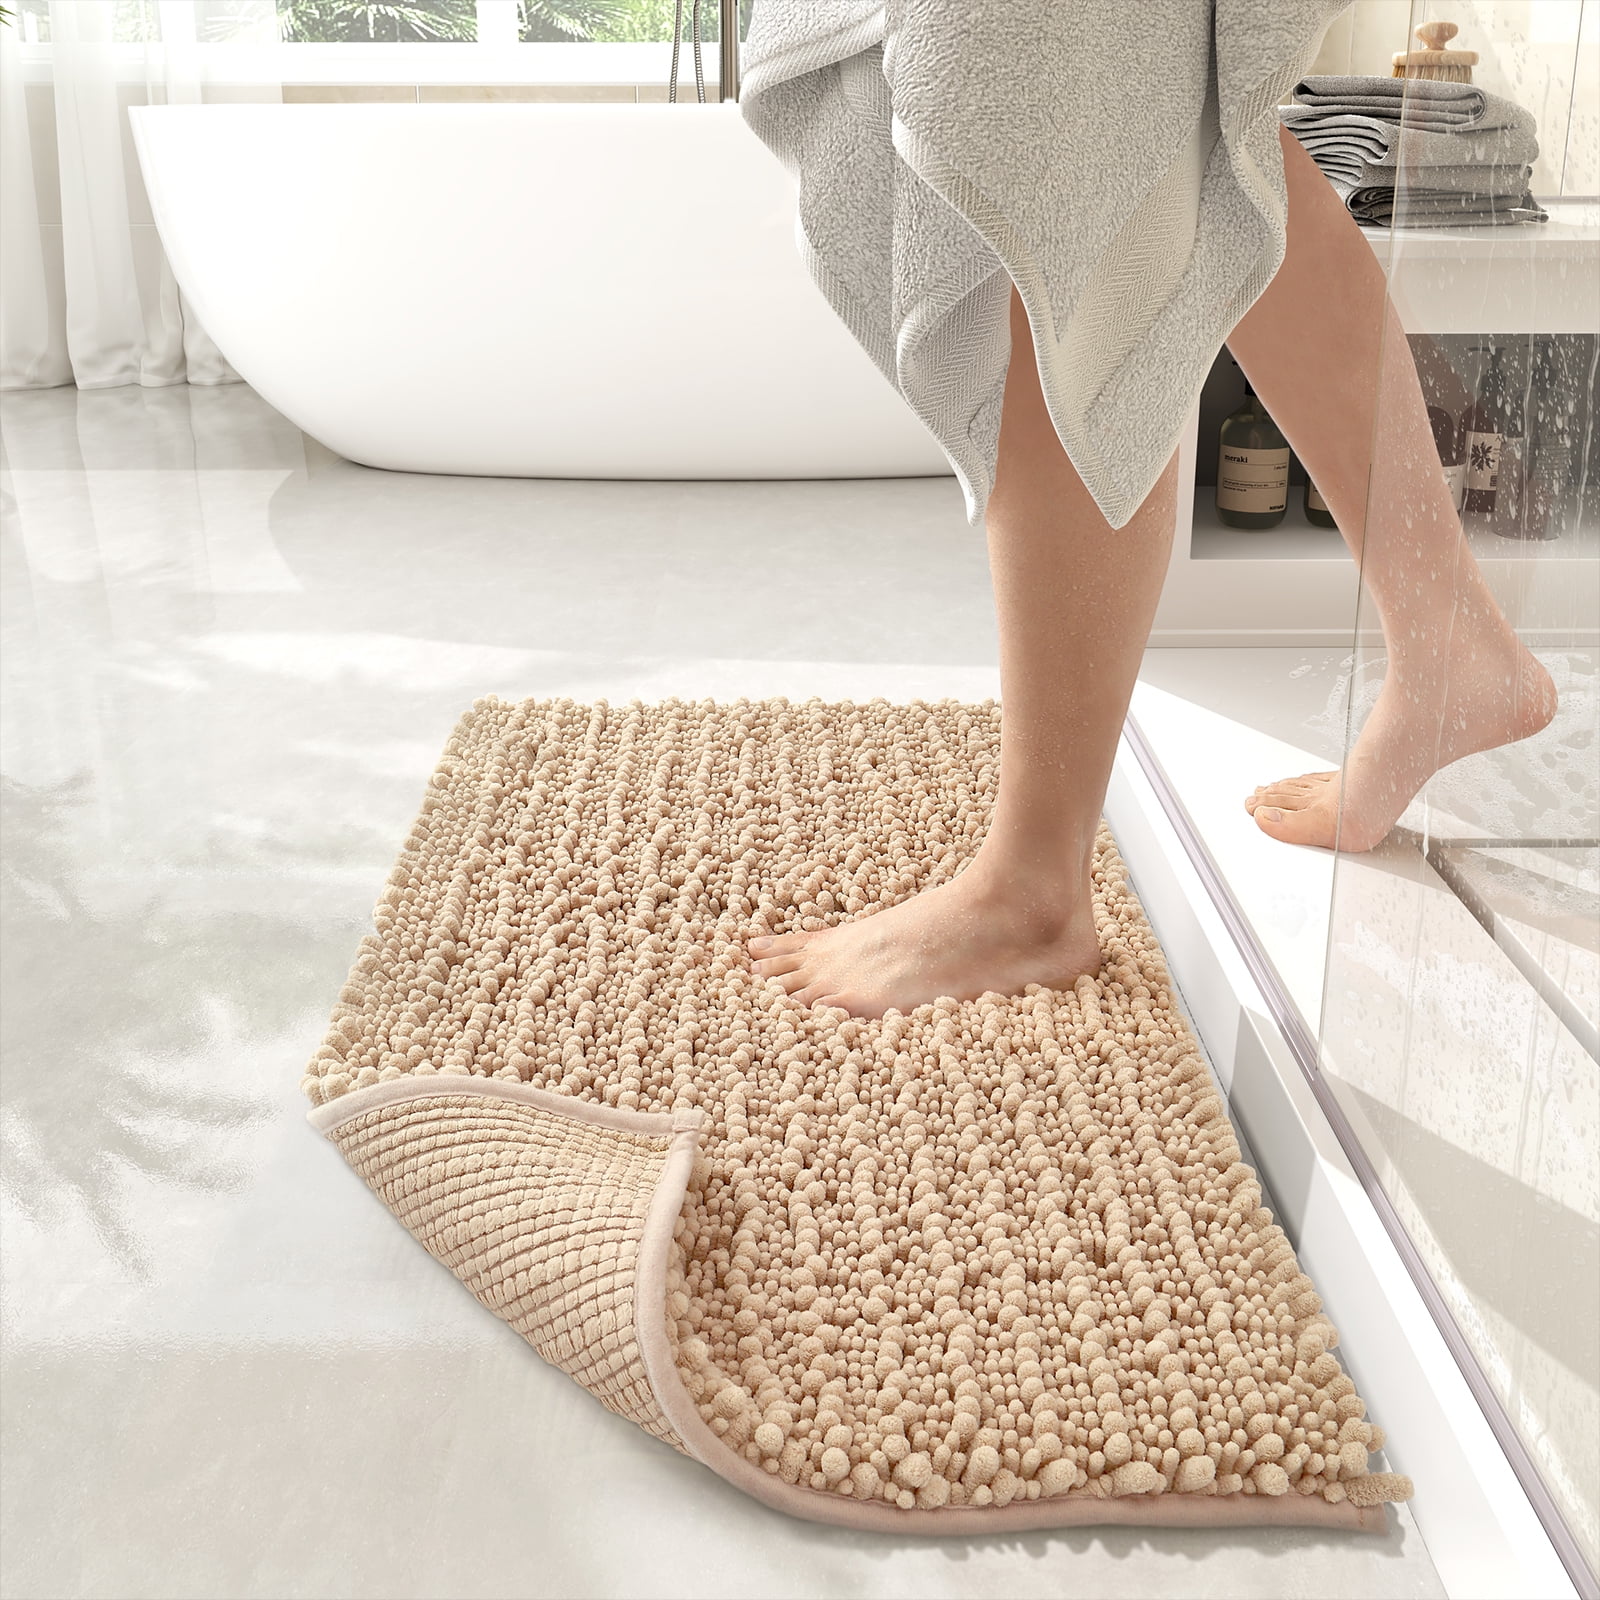 Blue And Black Cotton Bath Mat, For Bathroom, Mat Size: 30 X 20 Inches